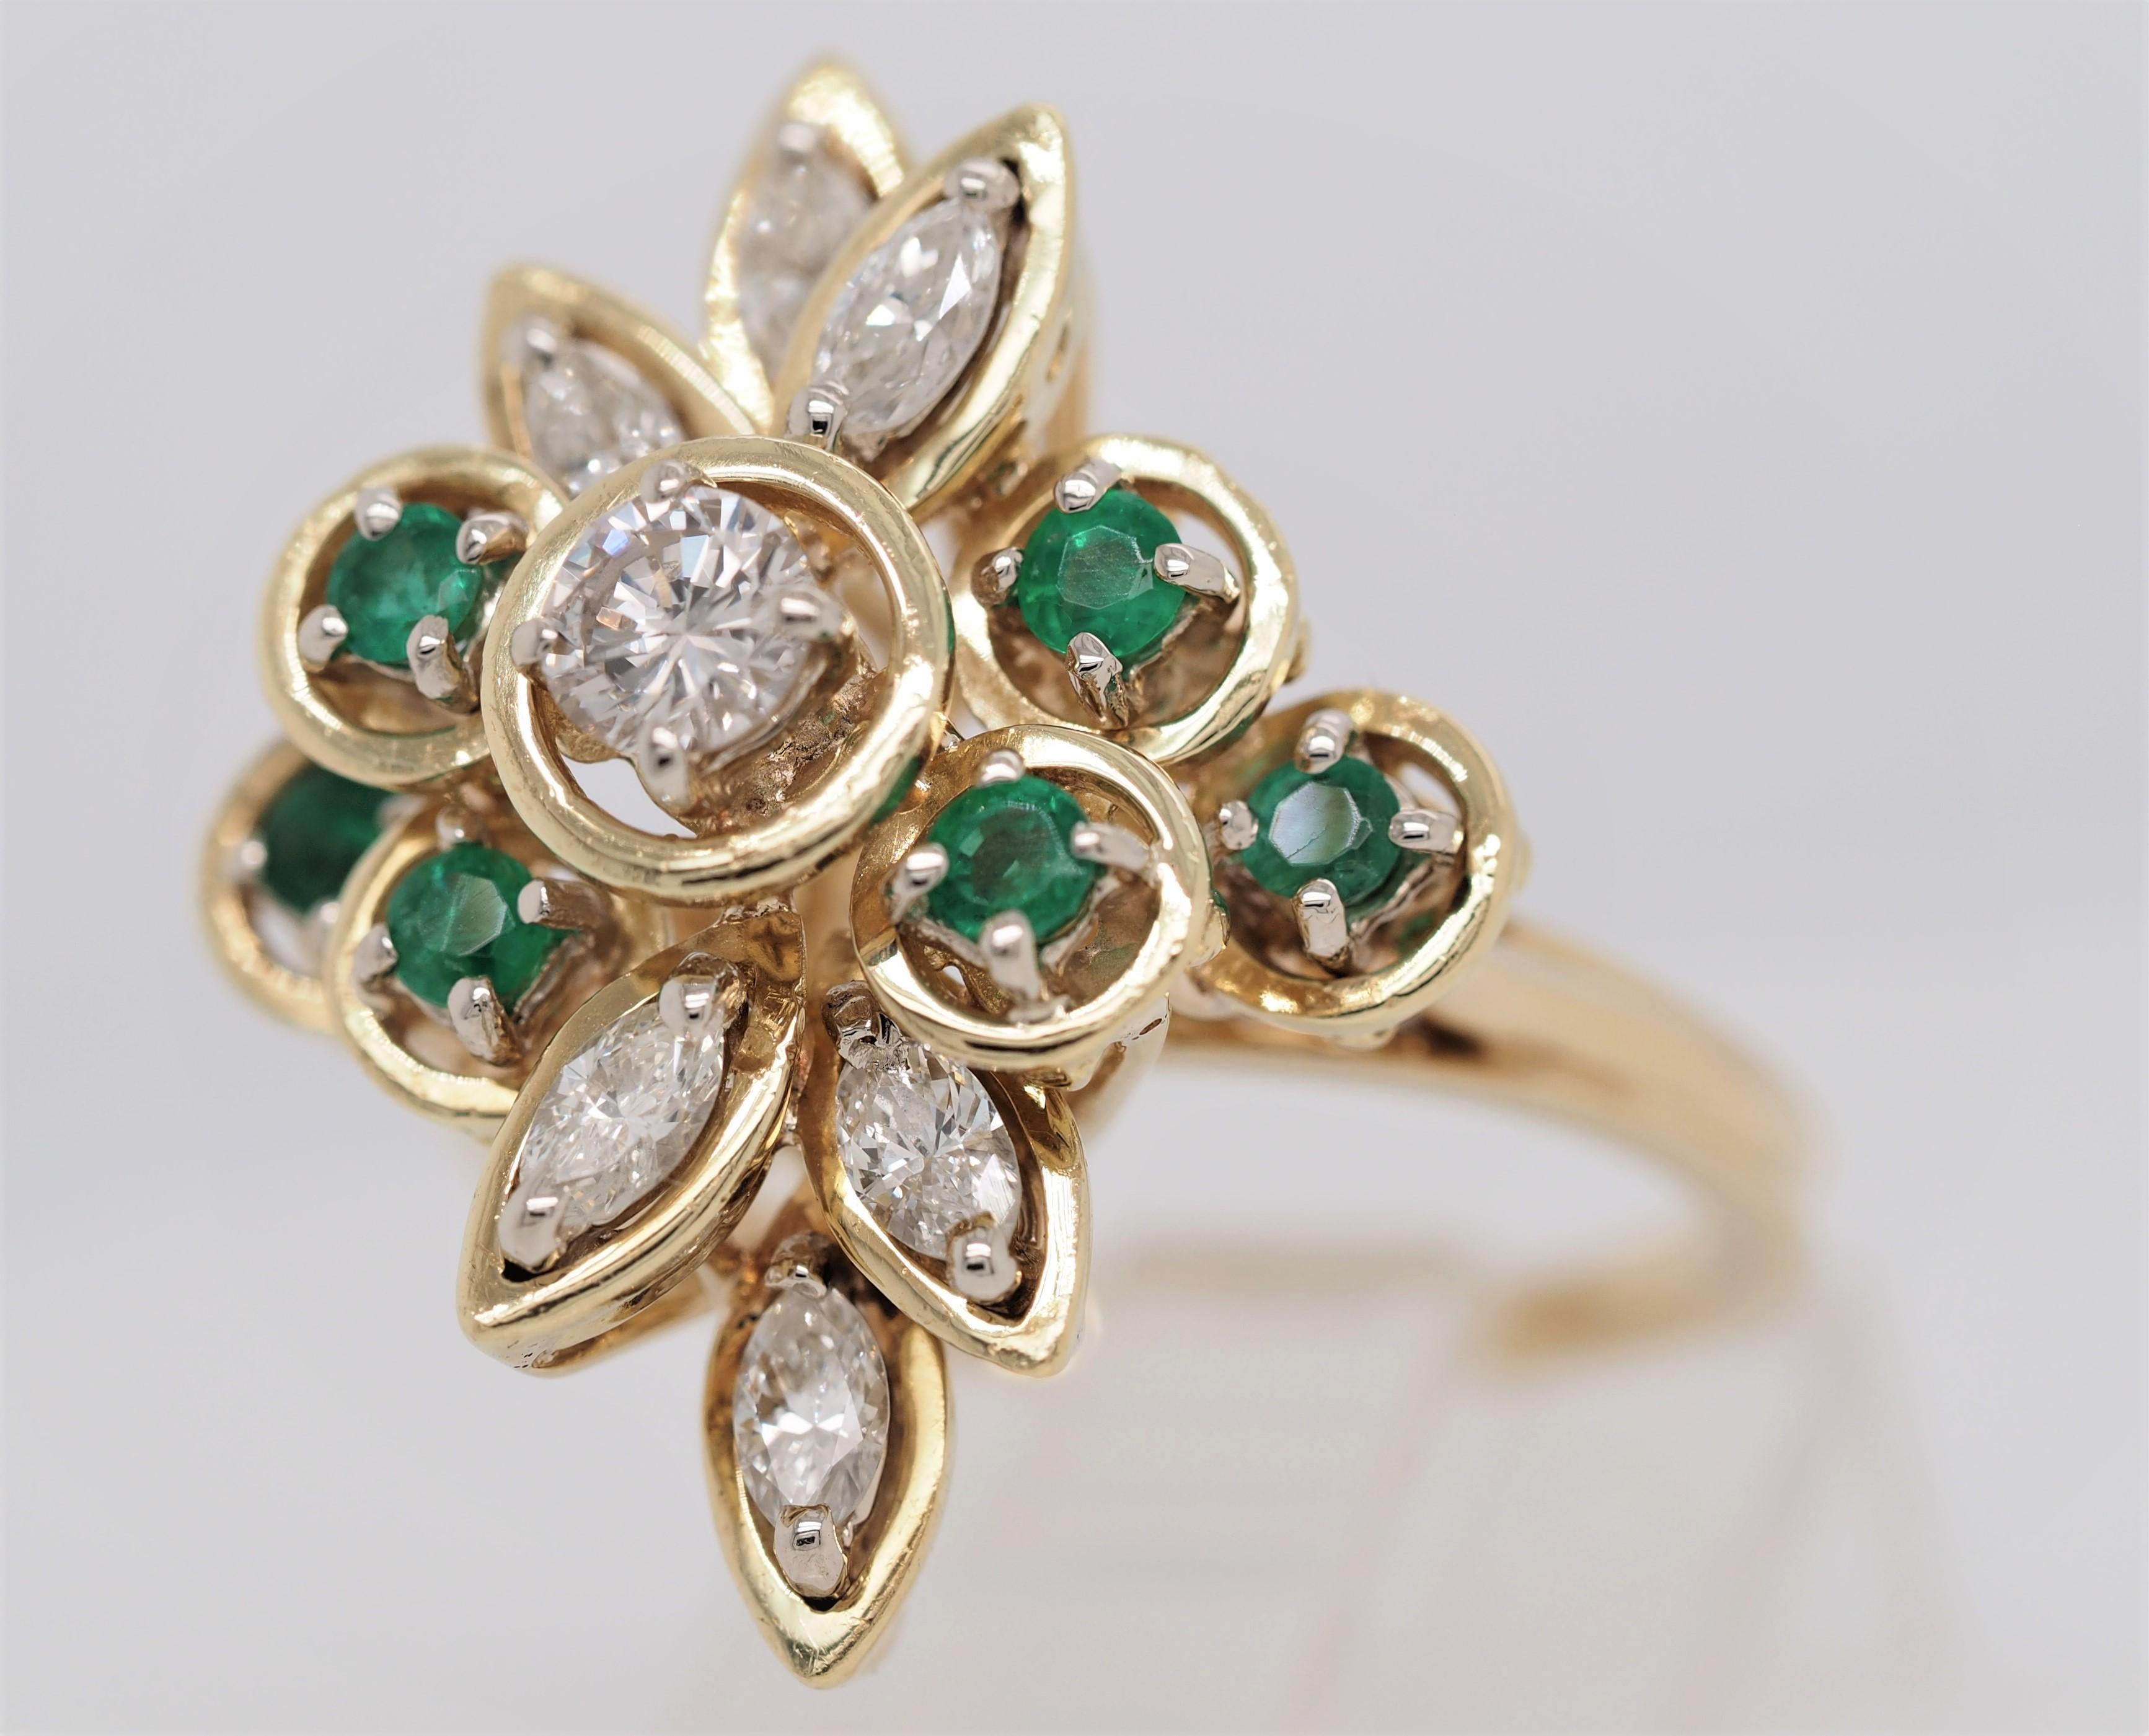 Classic 14K Yellow Gold Emerald and  Diamond Ring. This cocktail ring is crafted in 14 karat yellow gold featuring a round emerald weighing approximately 0.5 carats,  set in a 14 karat yellow gold four prong setting, flanked by 6 Marquise cut